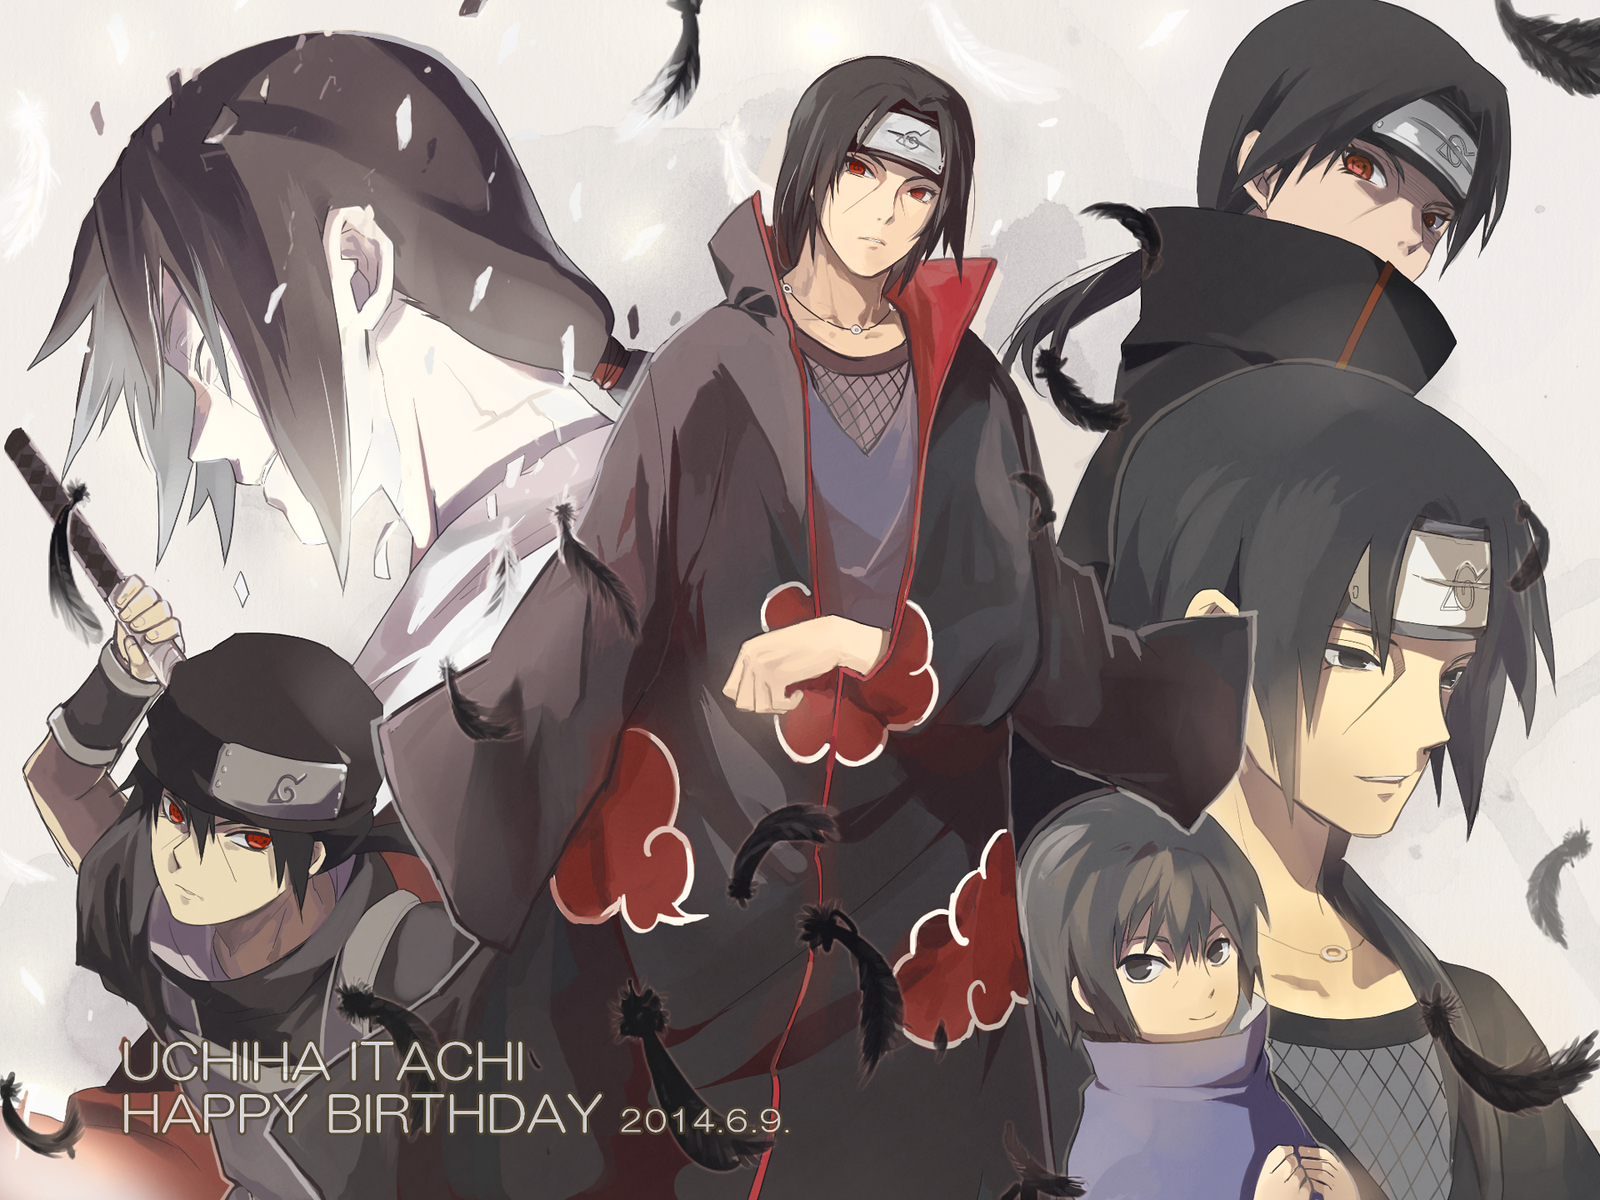 Is it worth it to cringe at Itachi?? - My, Naruto, Itachi Uchiha, Sasuke Uchiha, Anime, Anime, Anime art, , 